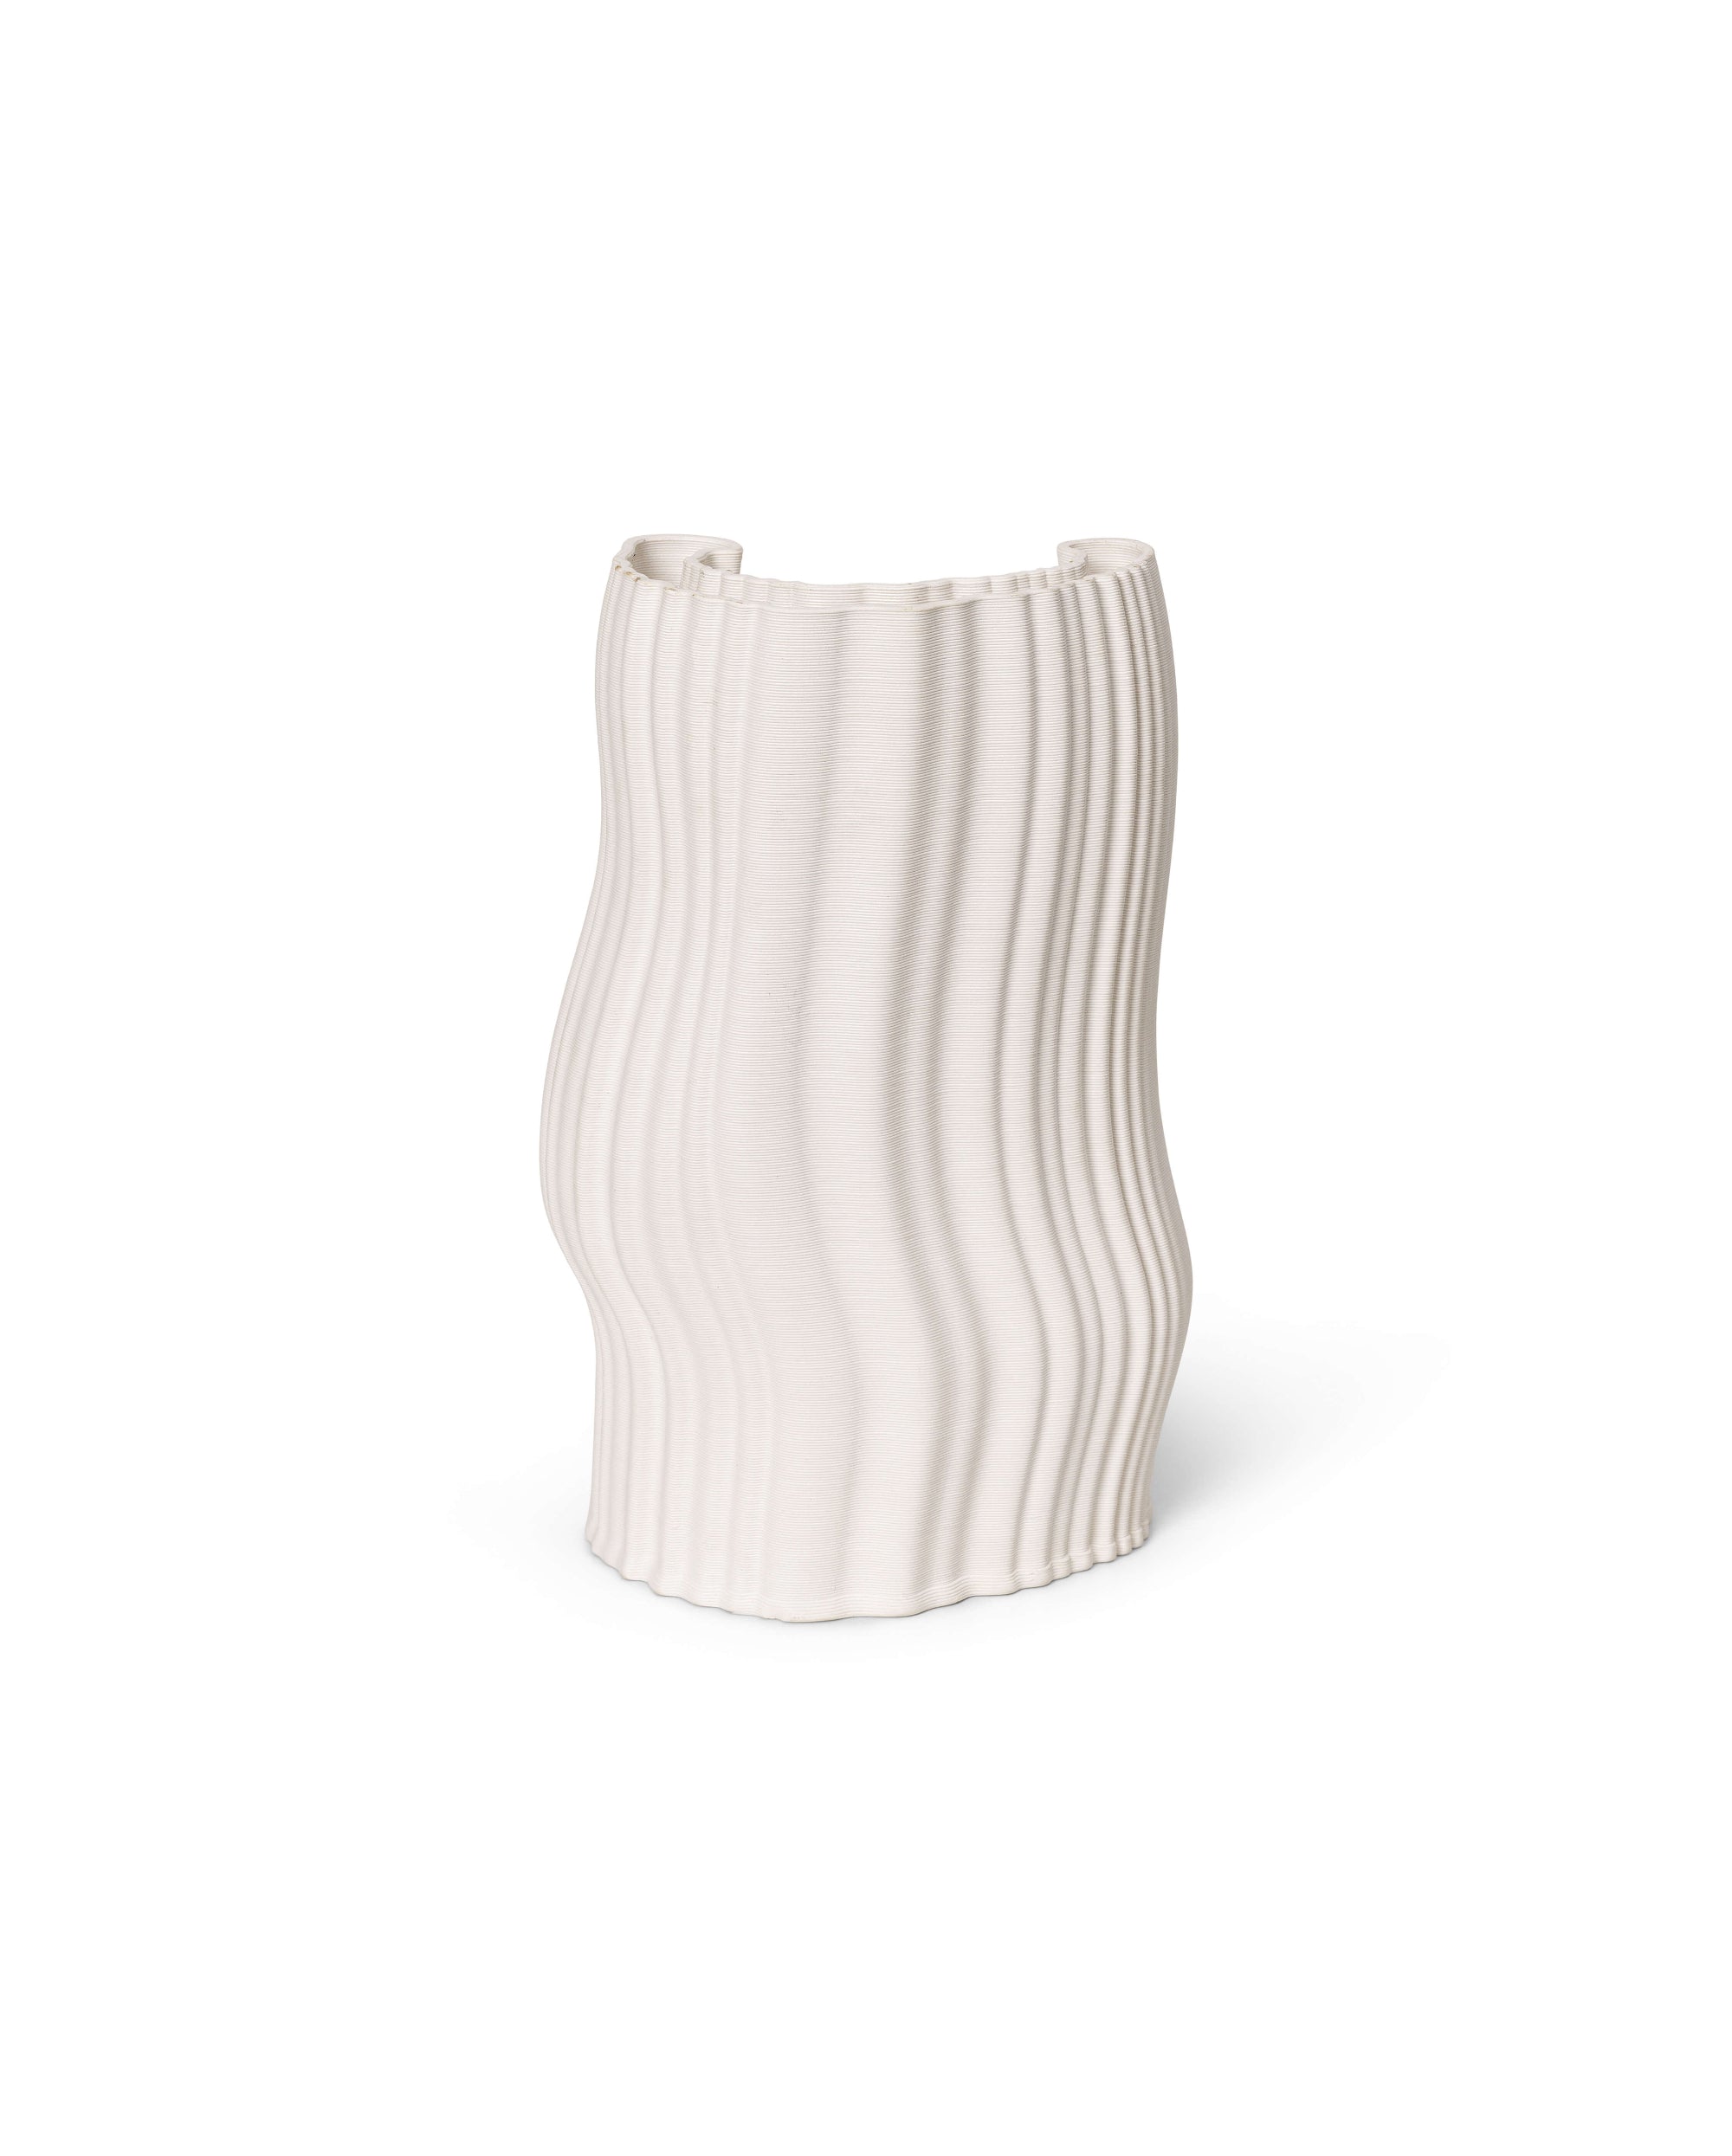 Moire Vase | Off-White | 3D Printed Clay | by ferm Living - Lifestory - ferm LIVING